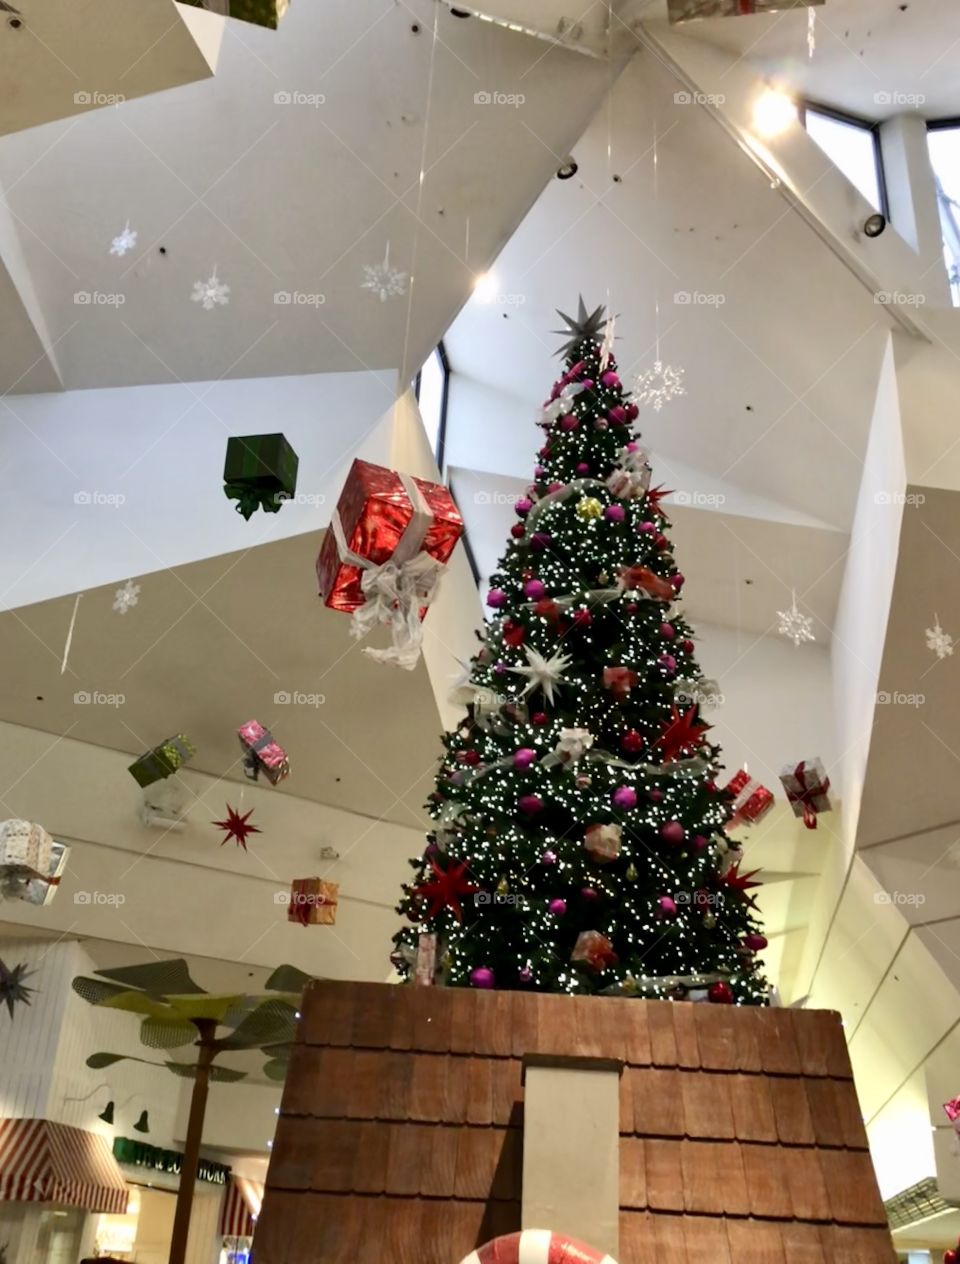 Christmas tree in mall.